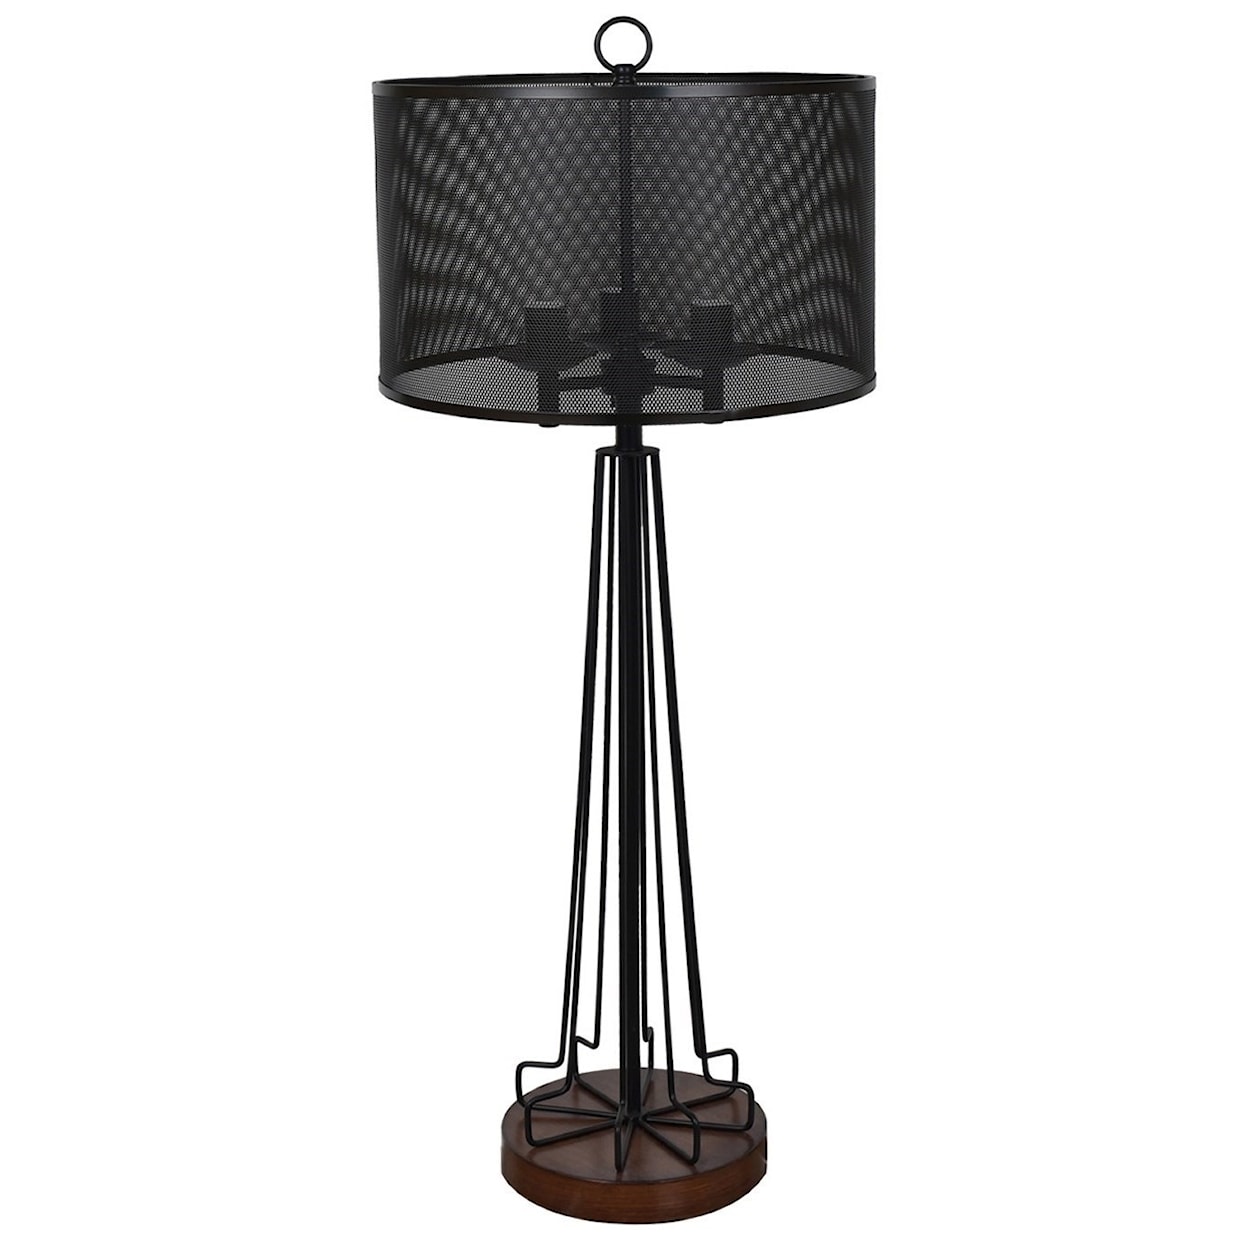 Crestview Collection Lighting Winder Table Lamp